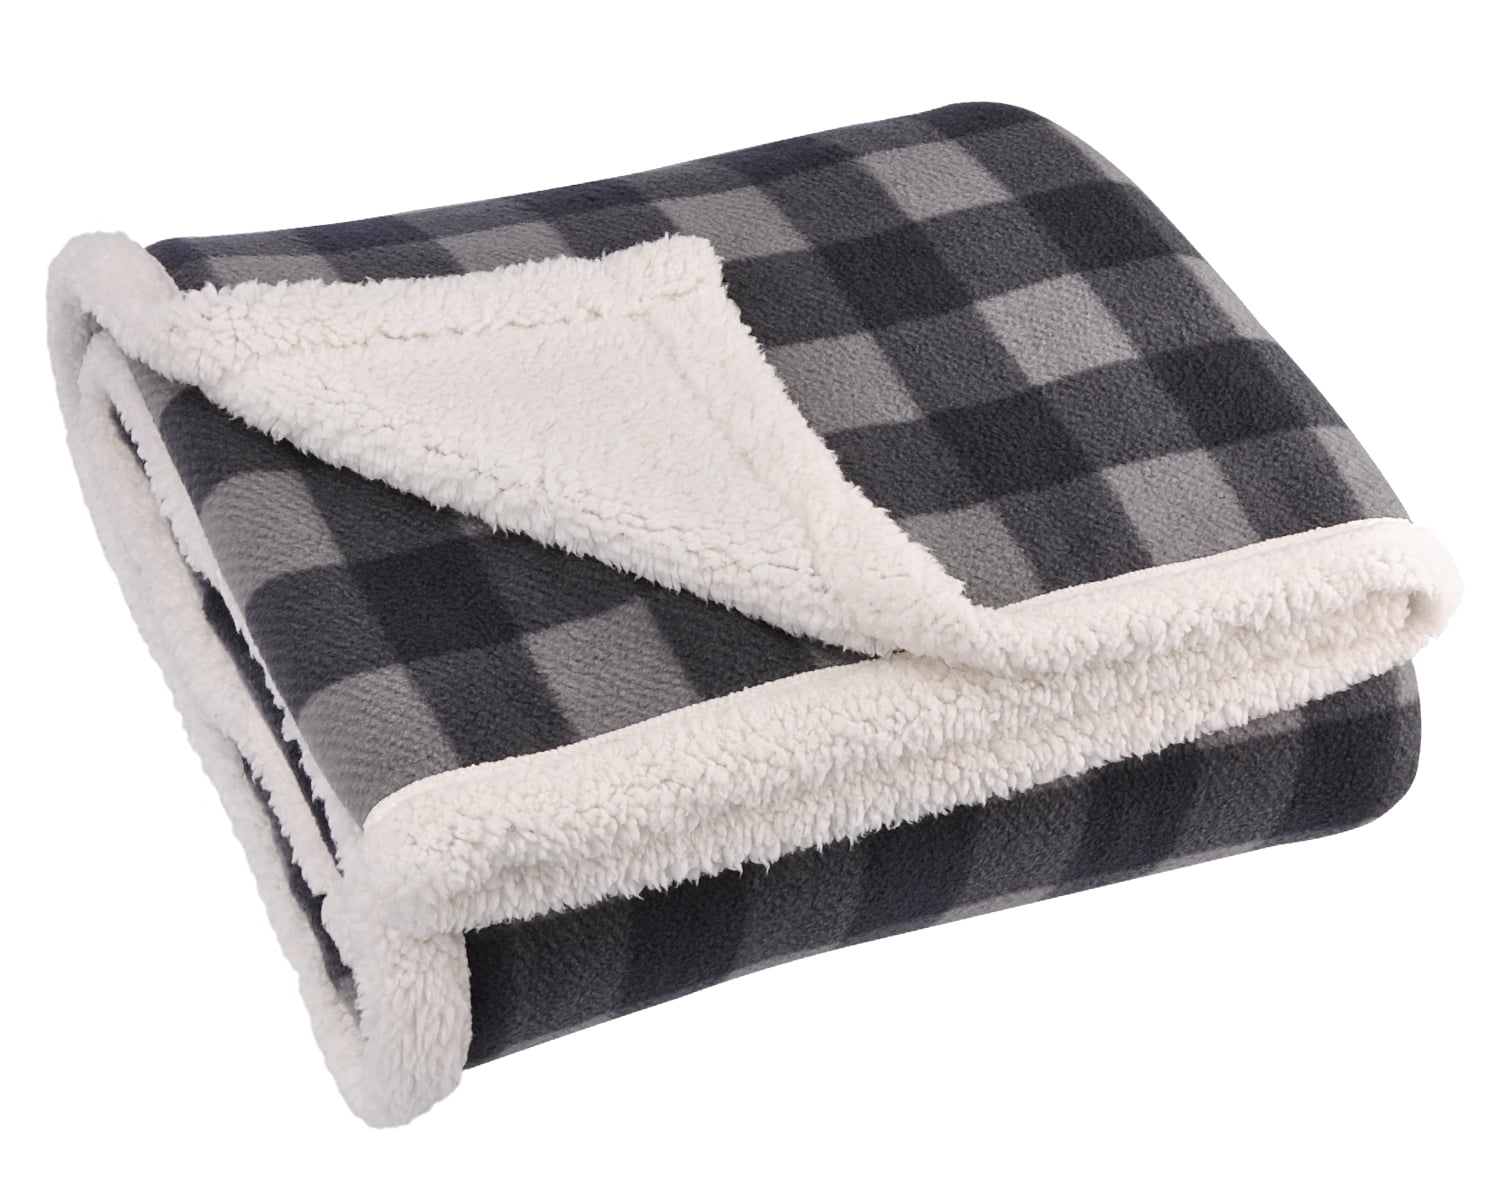 Buffalo Plaid Sherpa Throw TV Blanket 50 X 60 Super Soft Reversible Fleece Blanket For Cabin Bed Or Couch Catalonia Series By Terrania Walmartcom Walmartcom